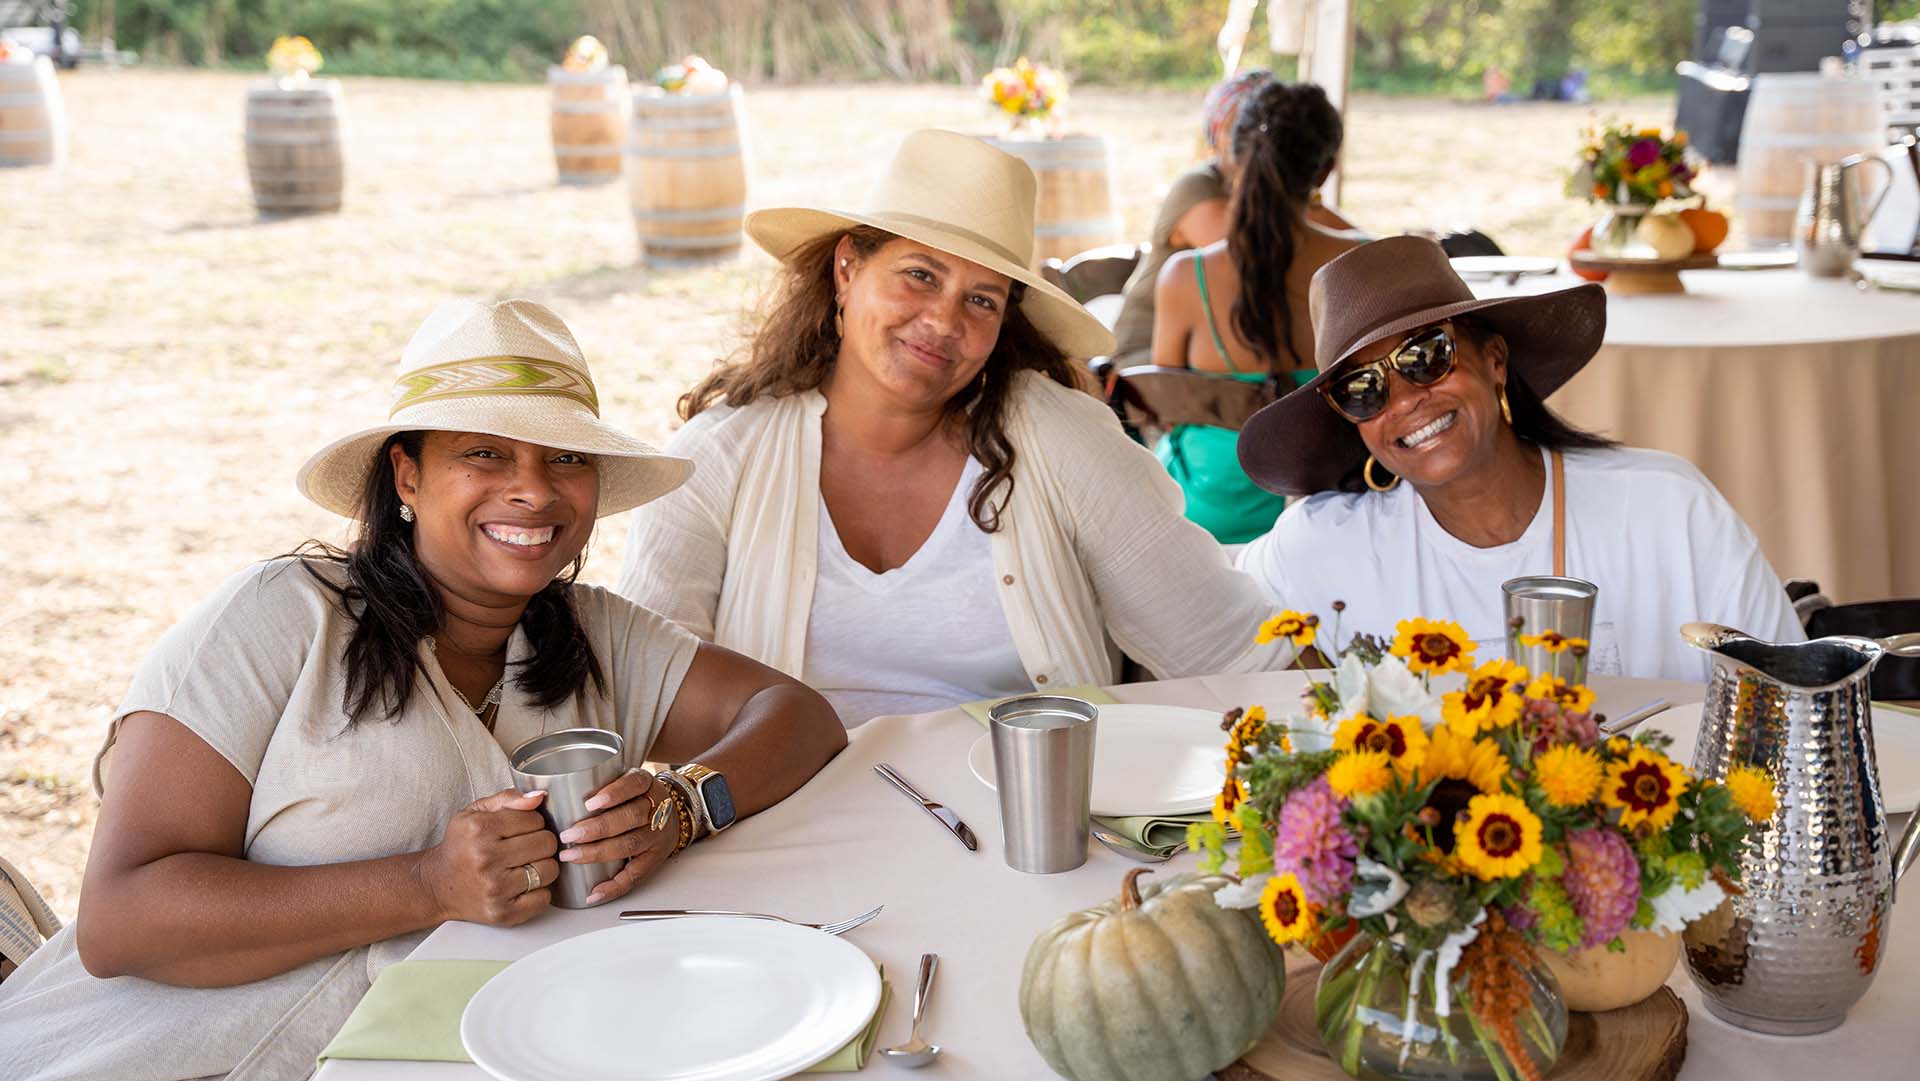 Three smiling women dressed in all white sit at a table outdoors, awaiting the start of a meal.